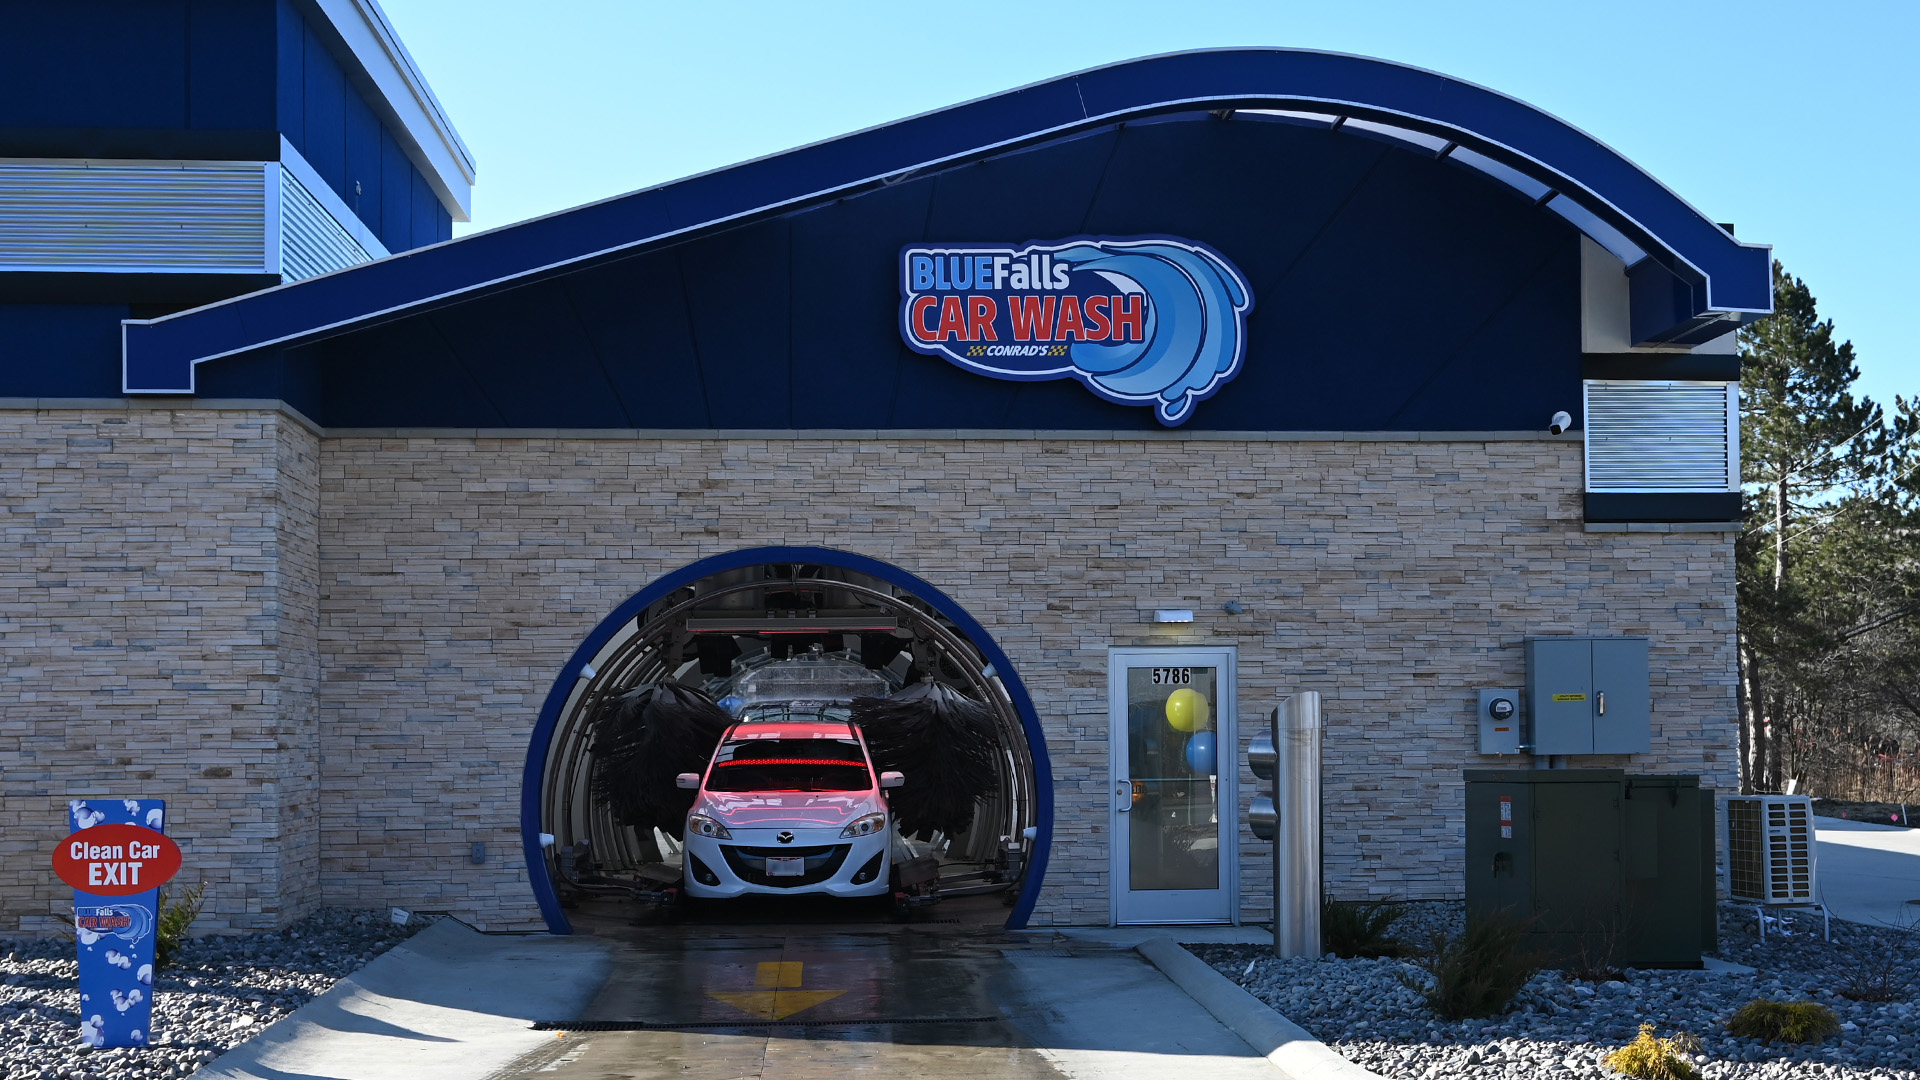 Blue Falls Car Wash is now open in Mentor.